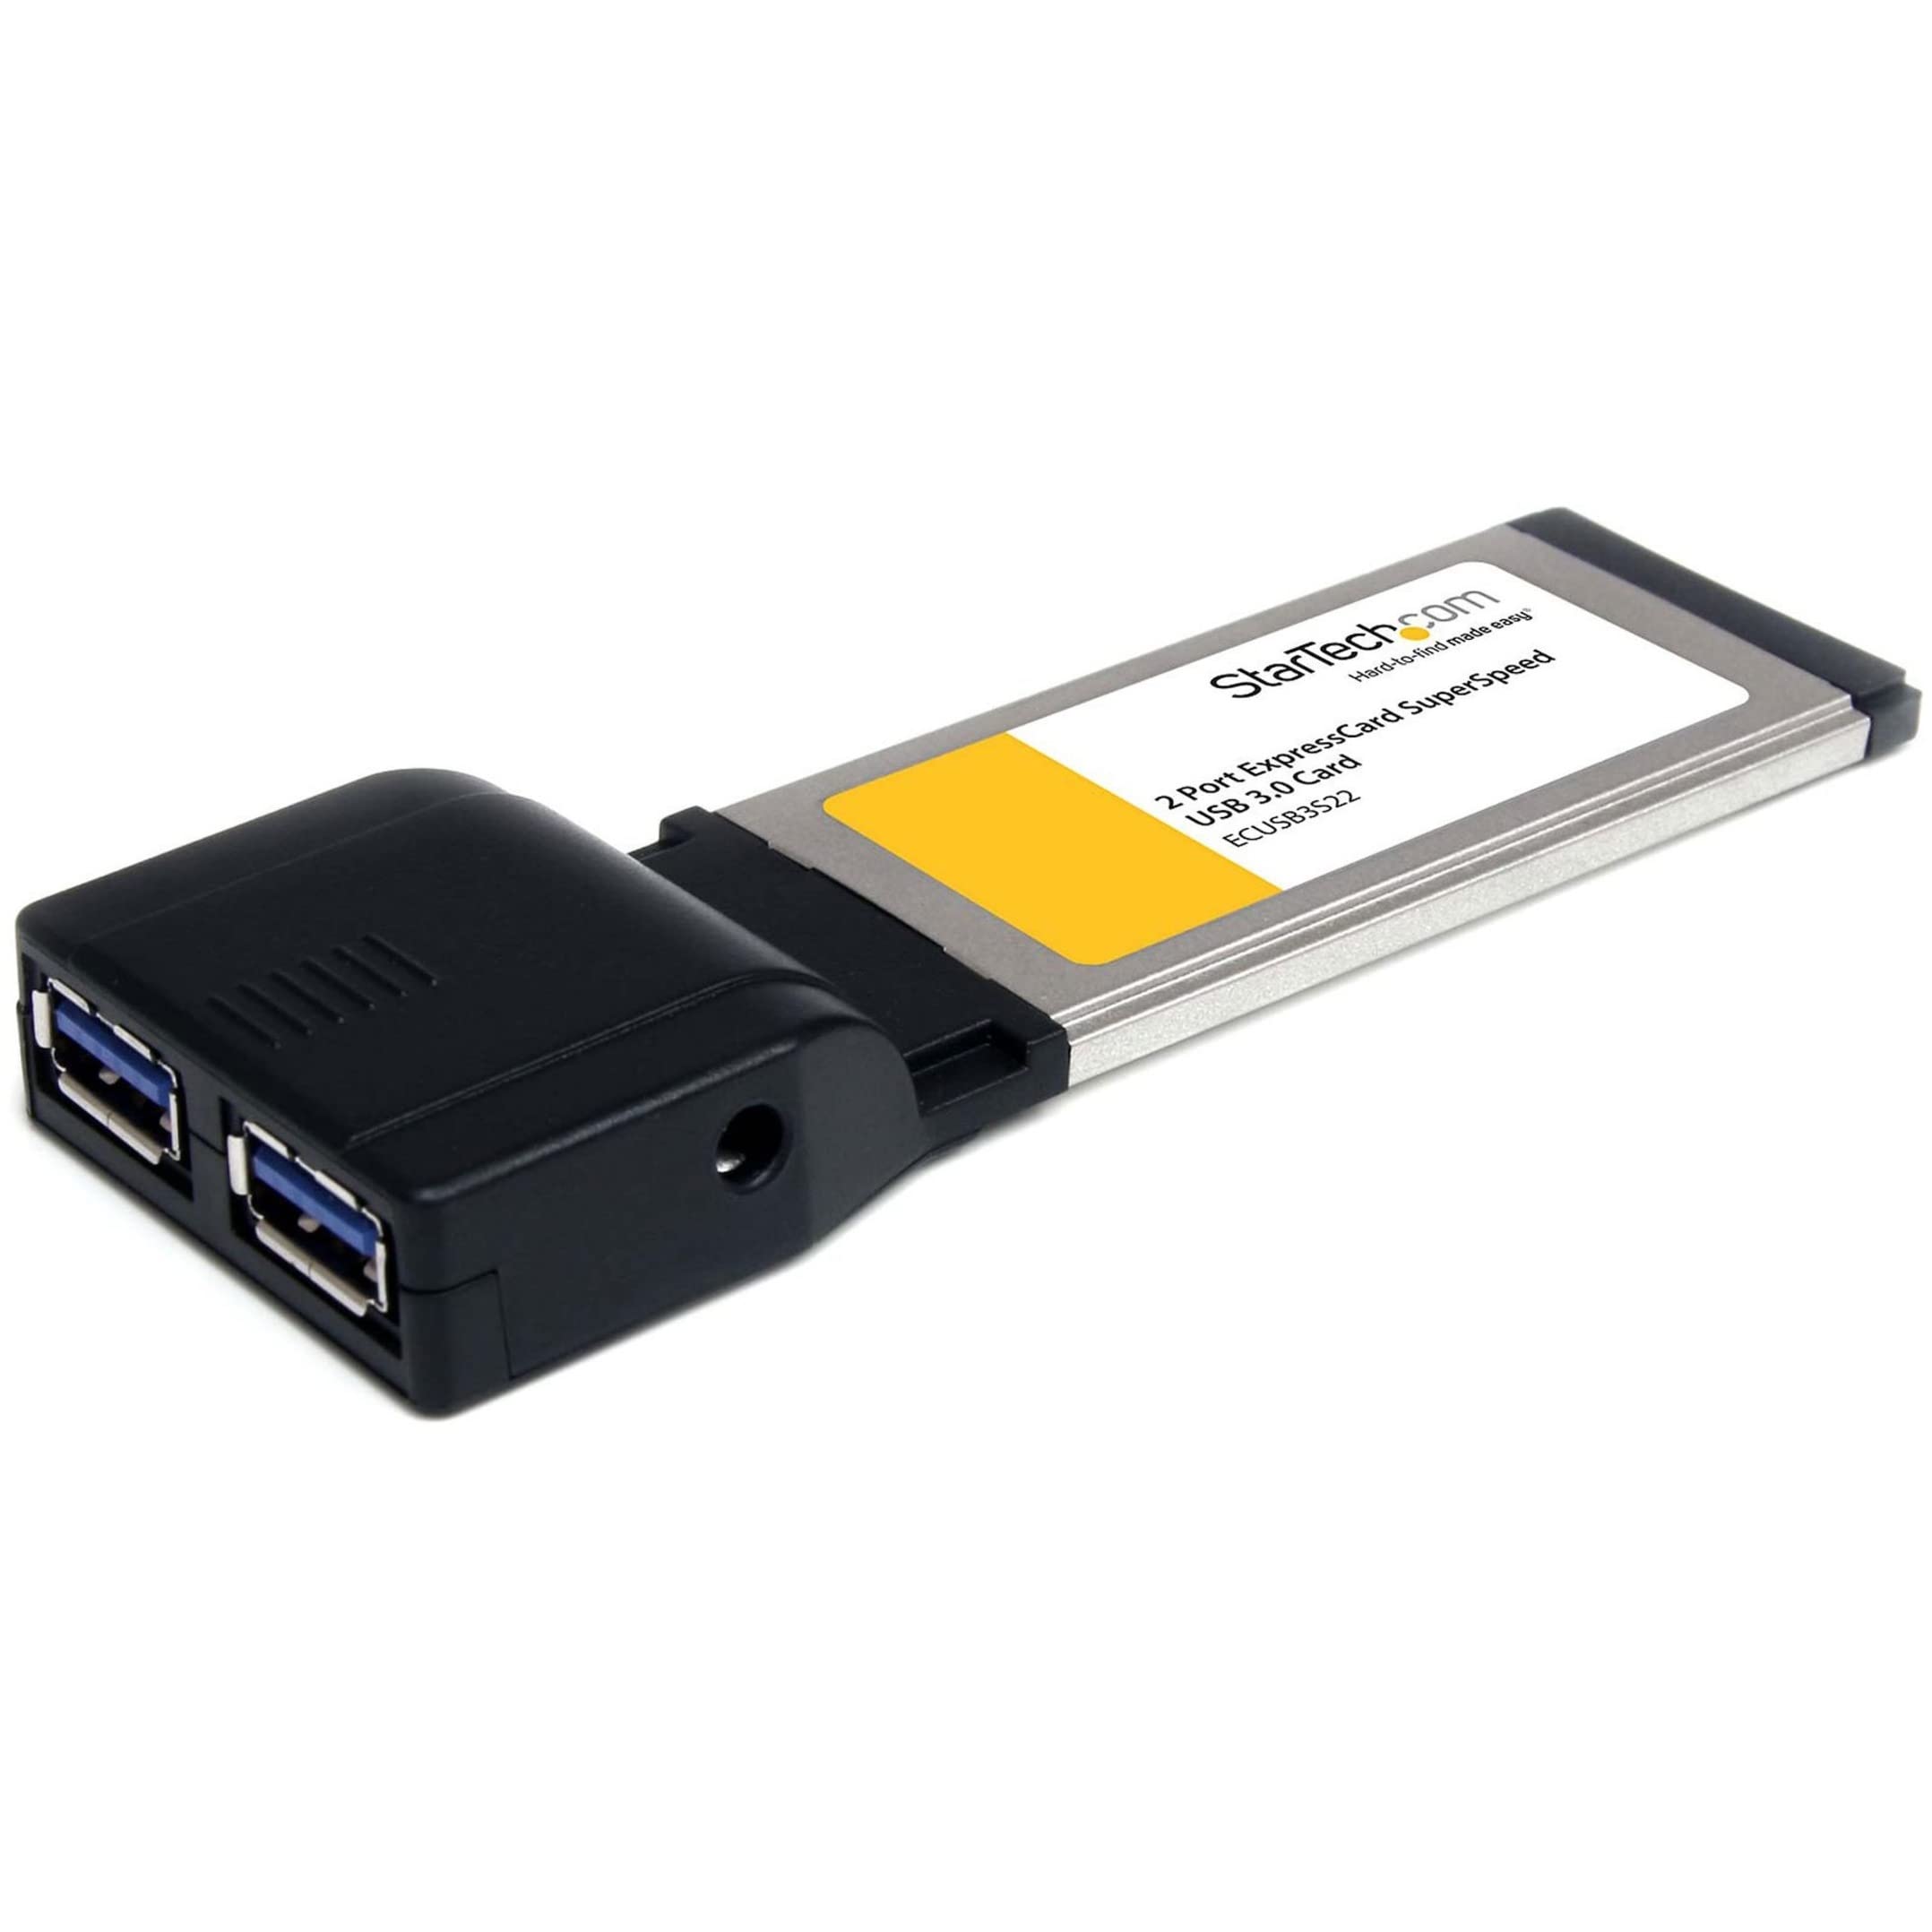 Sheda Expresscard Usb3 0 Startech Comp Cards And Adapters Ecusb3s22 65030845717